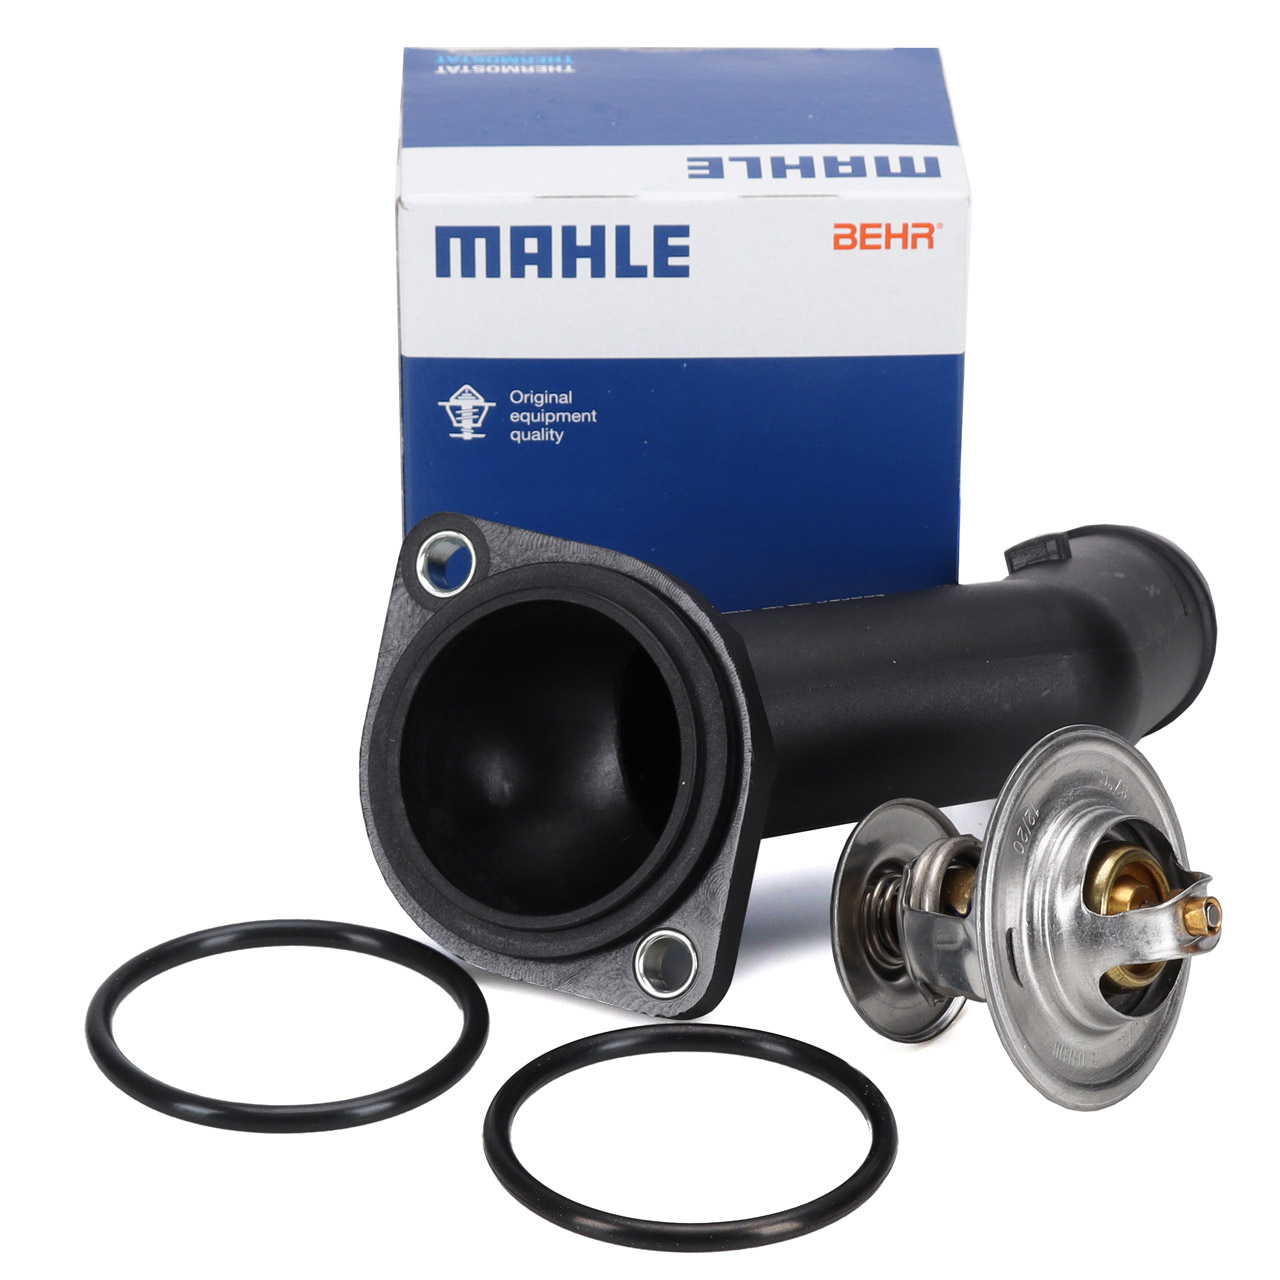 MAHLE Thermostate Auto / Thermostatgehäuse - TX 15 87D, 108 189 